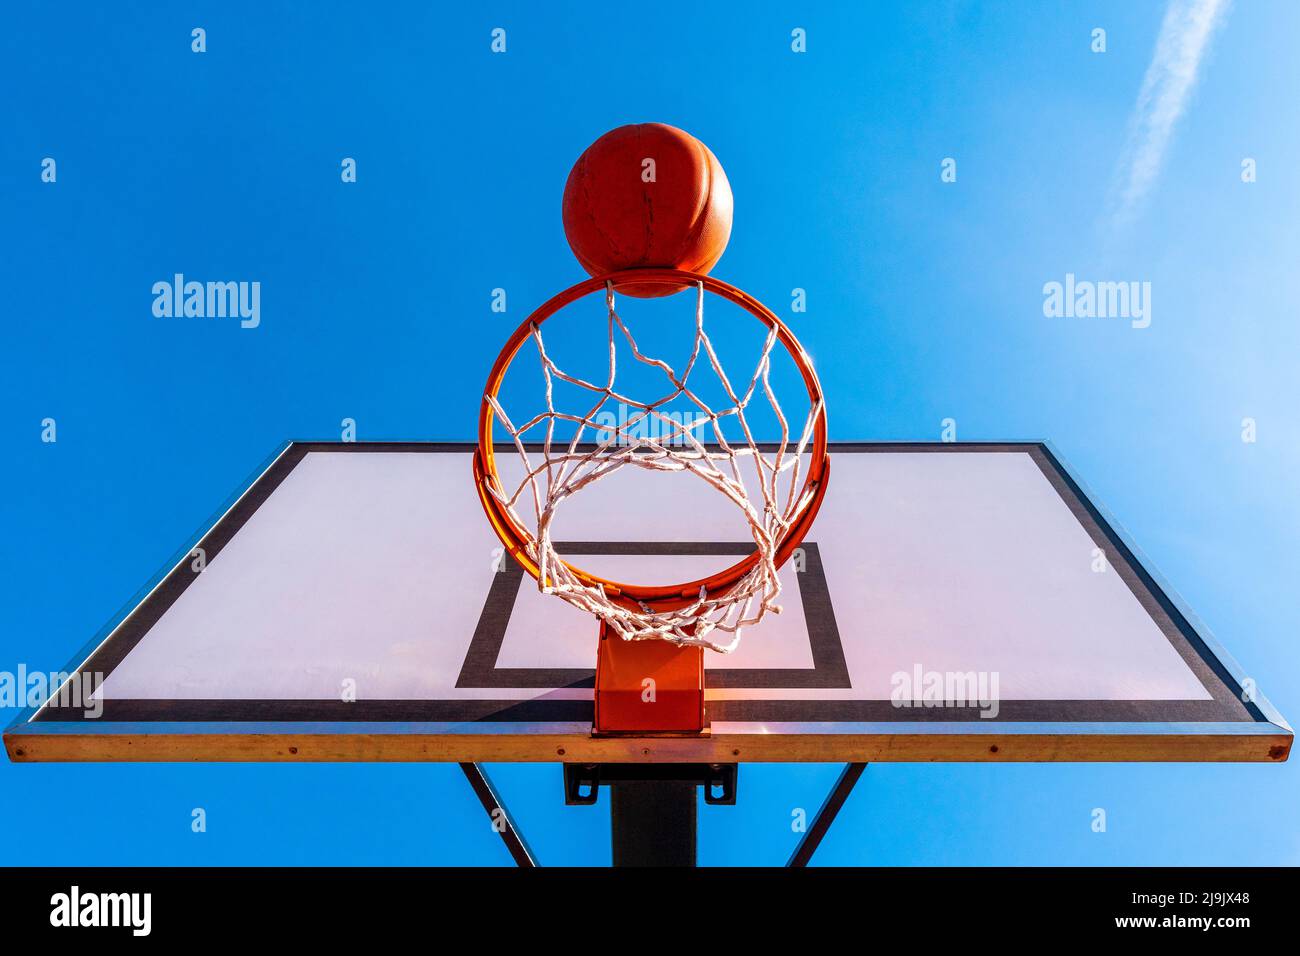 Orange basketball ball falling into the hoop. Urban youth game. Concept of success, scoring points and winning. Low angle view. Stock Photo